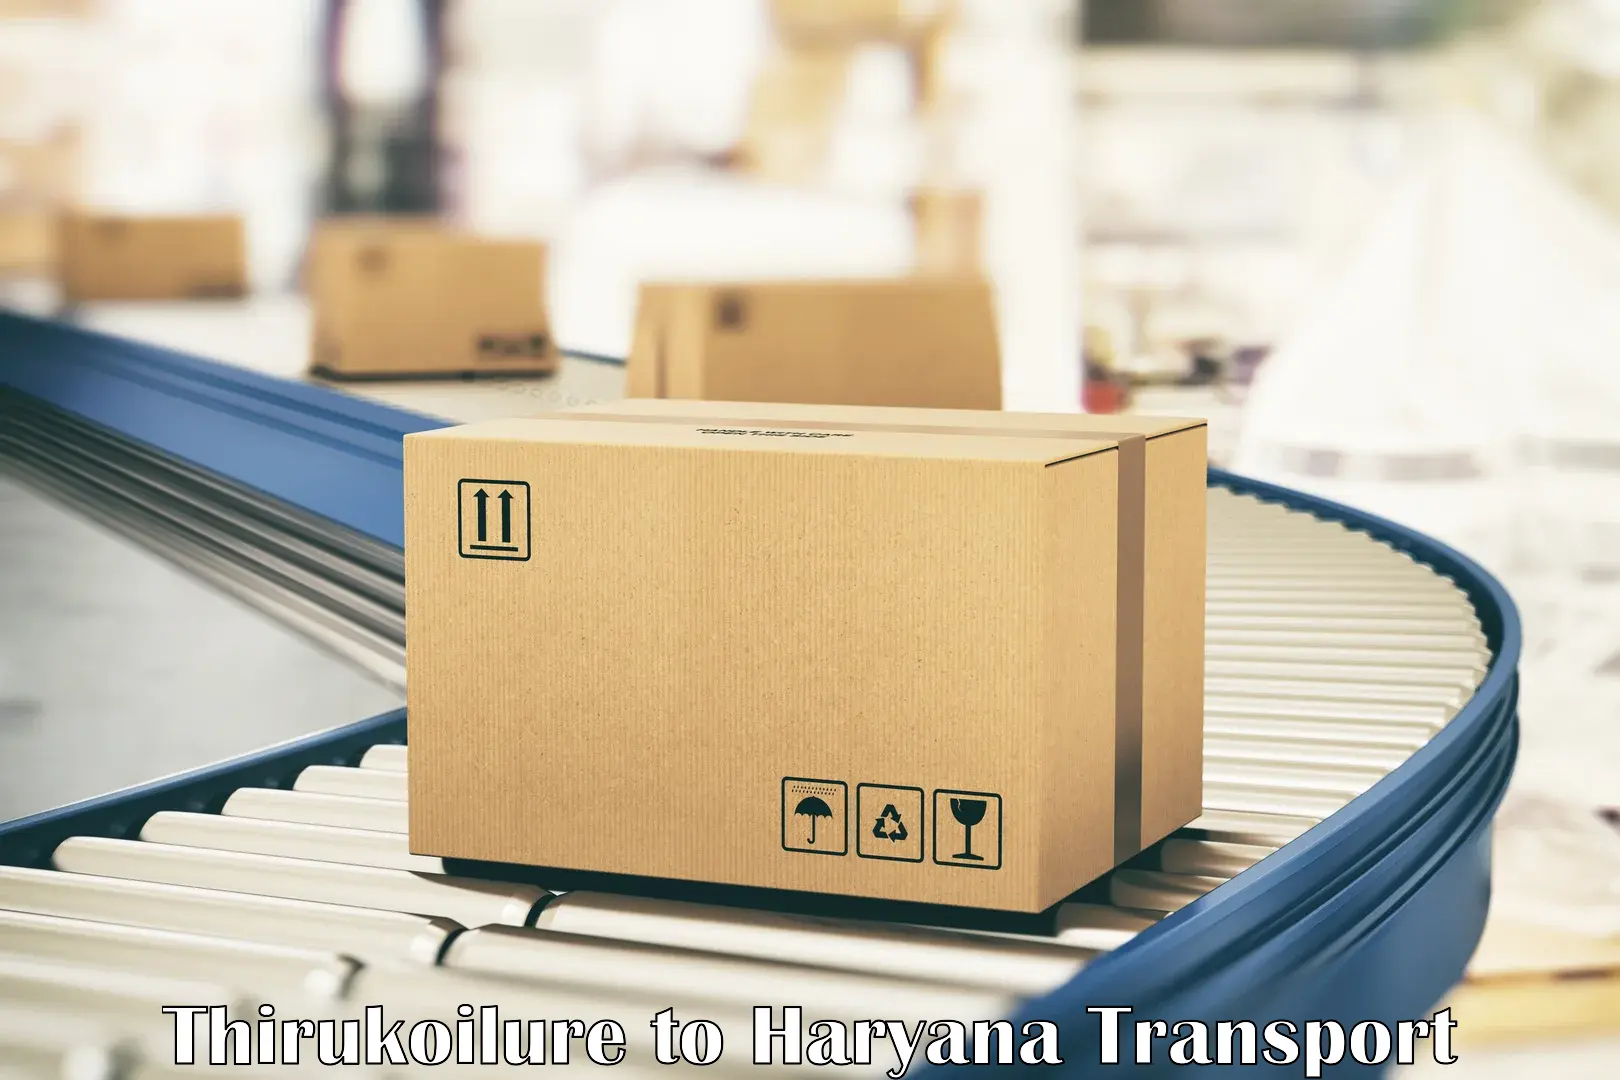 Road transport online services Thirukoilure to Panipat